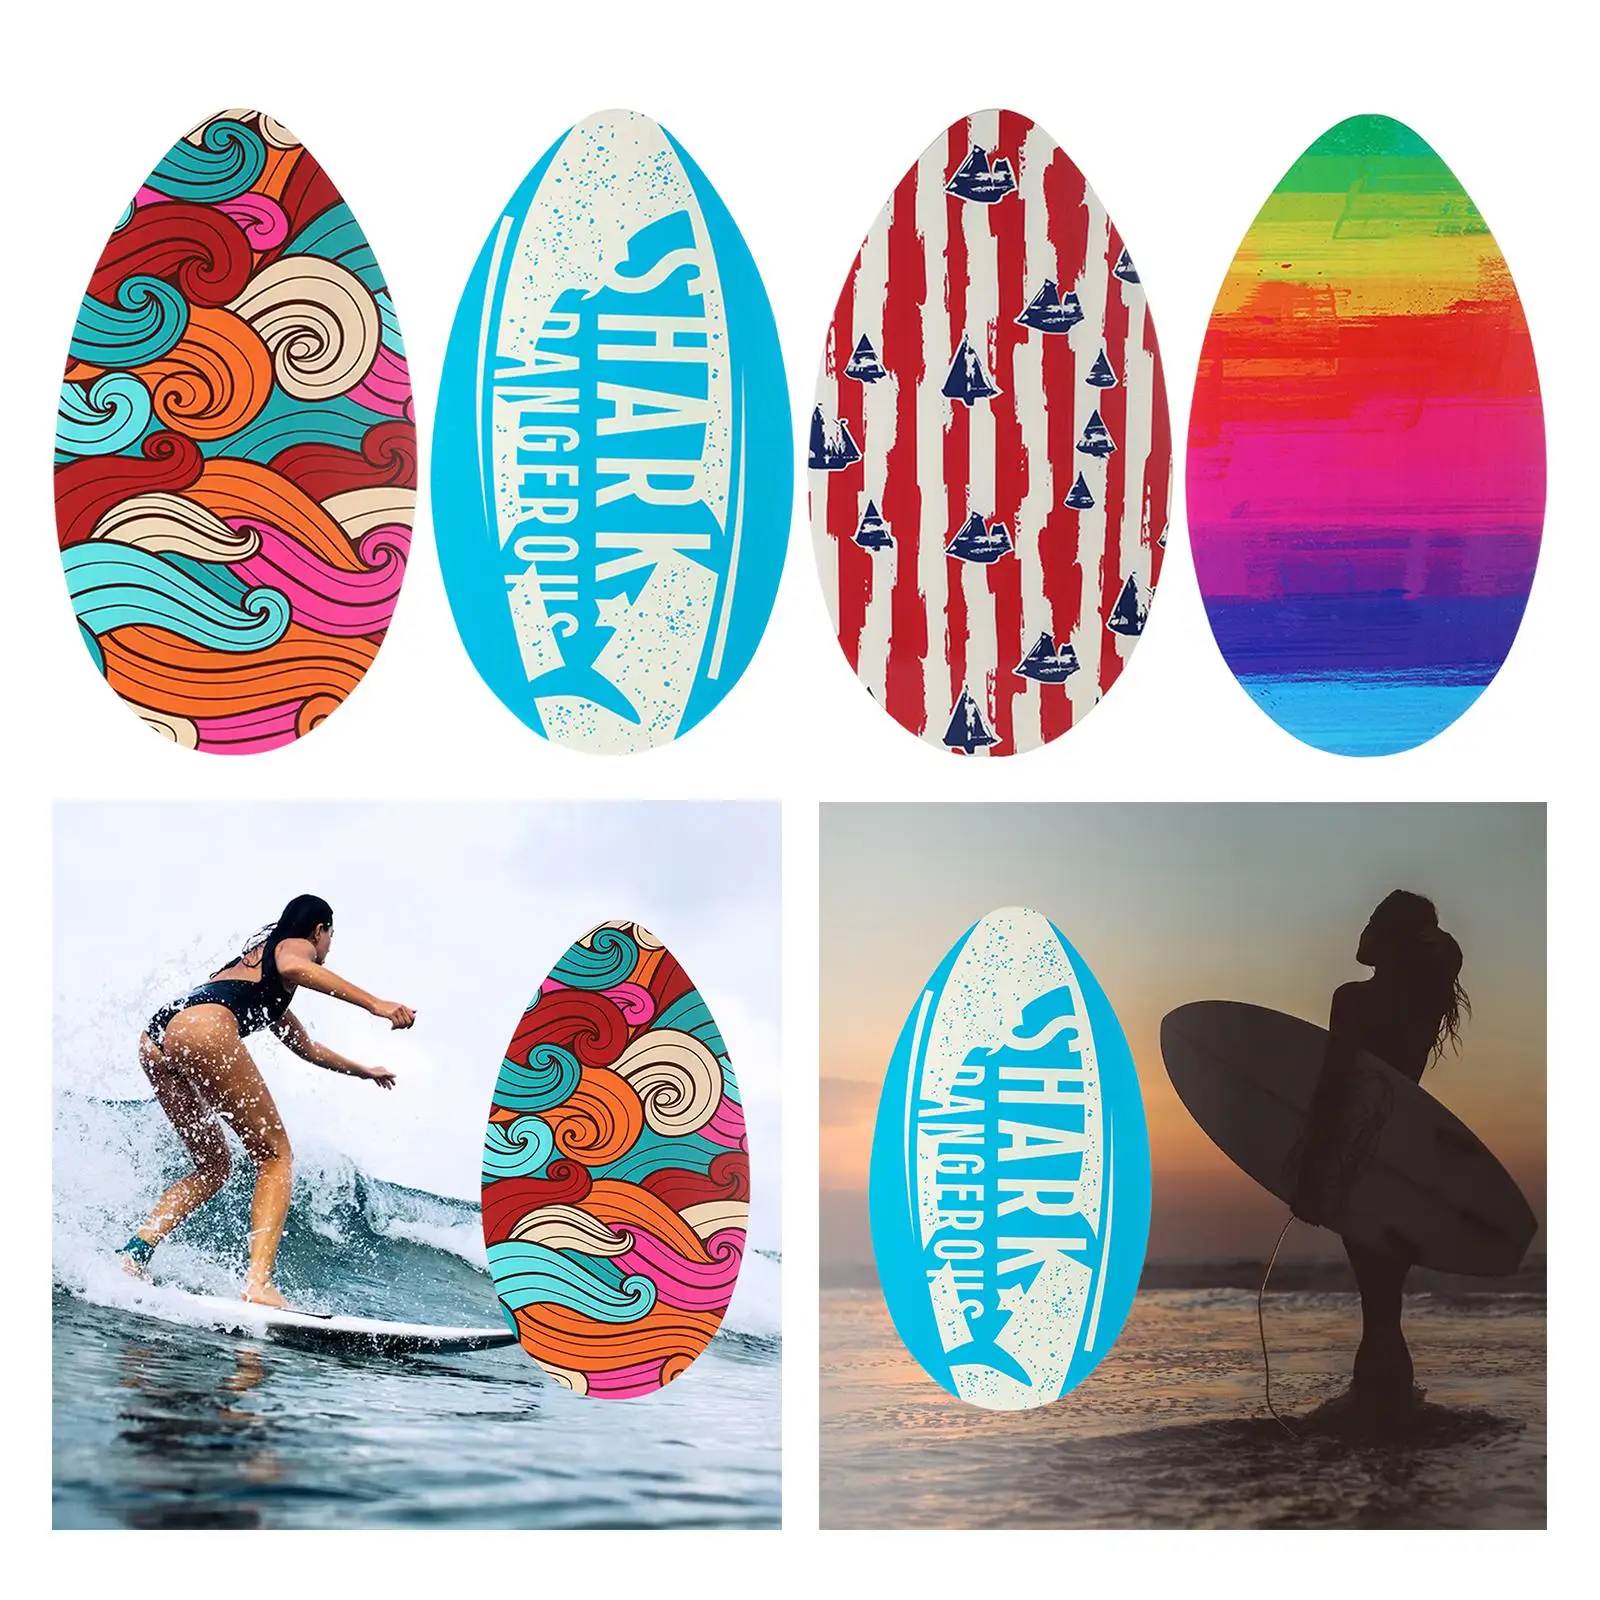 Wood Skimboard for 2 Sizes Wood Construction Pool Gift Multiple Designs for